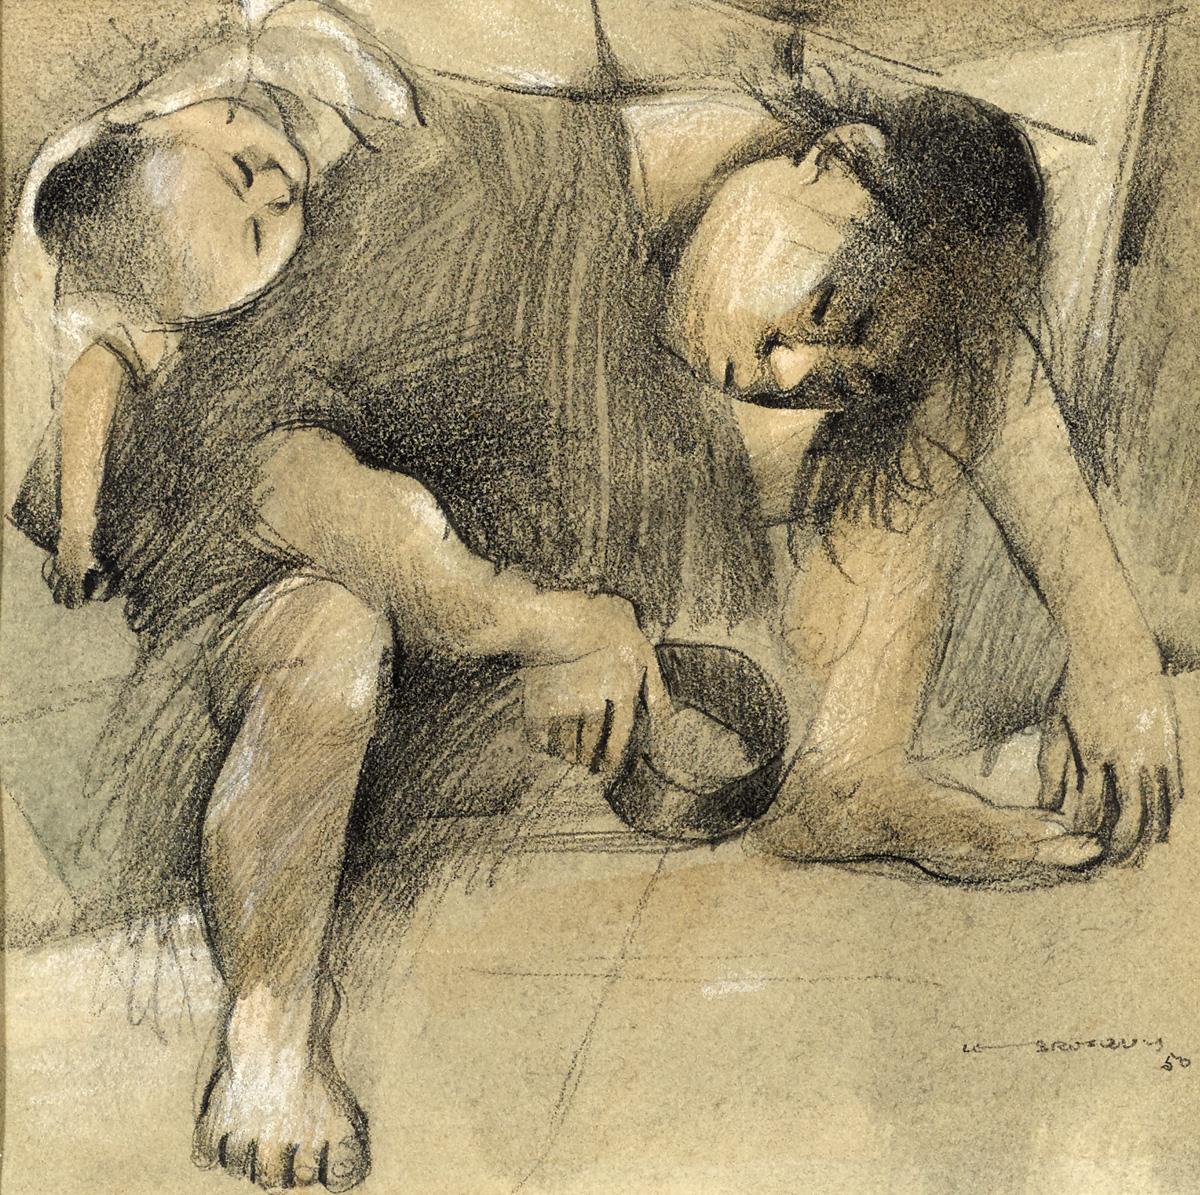 MOTHER AND CHILD, 1950 by Louis le Brocquy HRHA (1916-2012) HRHA (1916-2012) at Whyte's Auctions